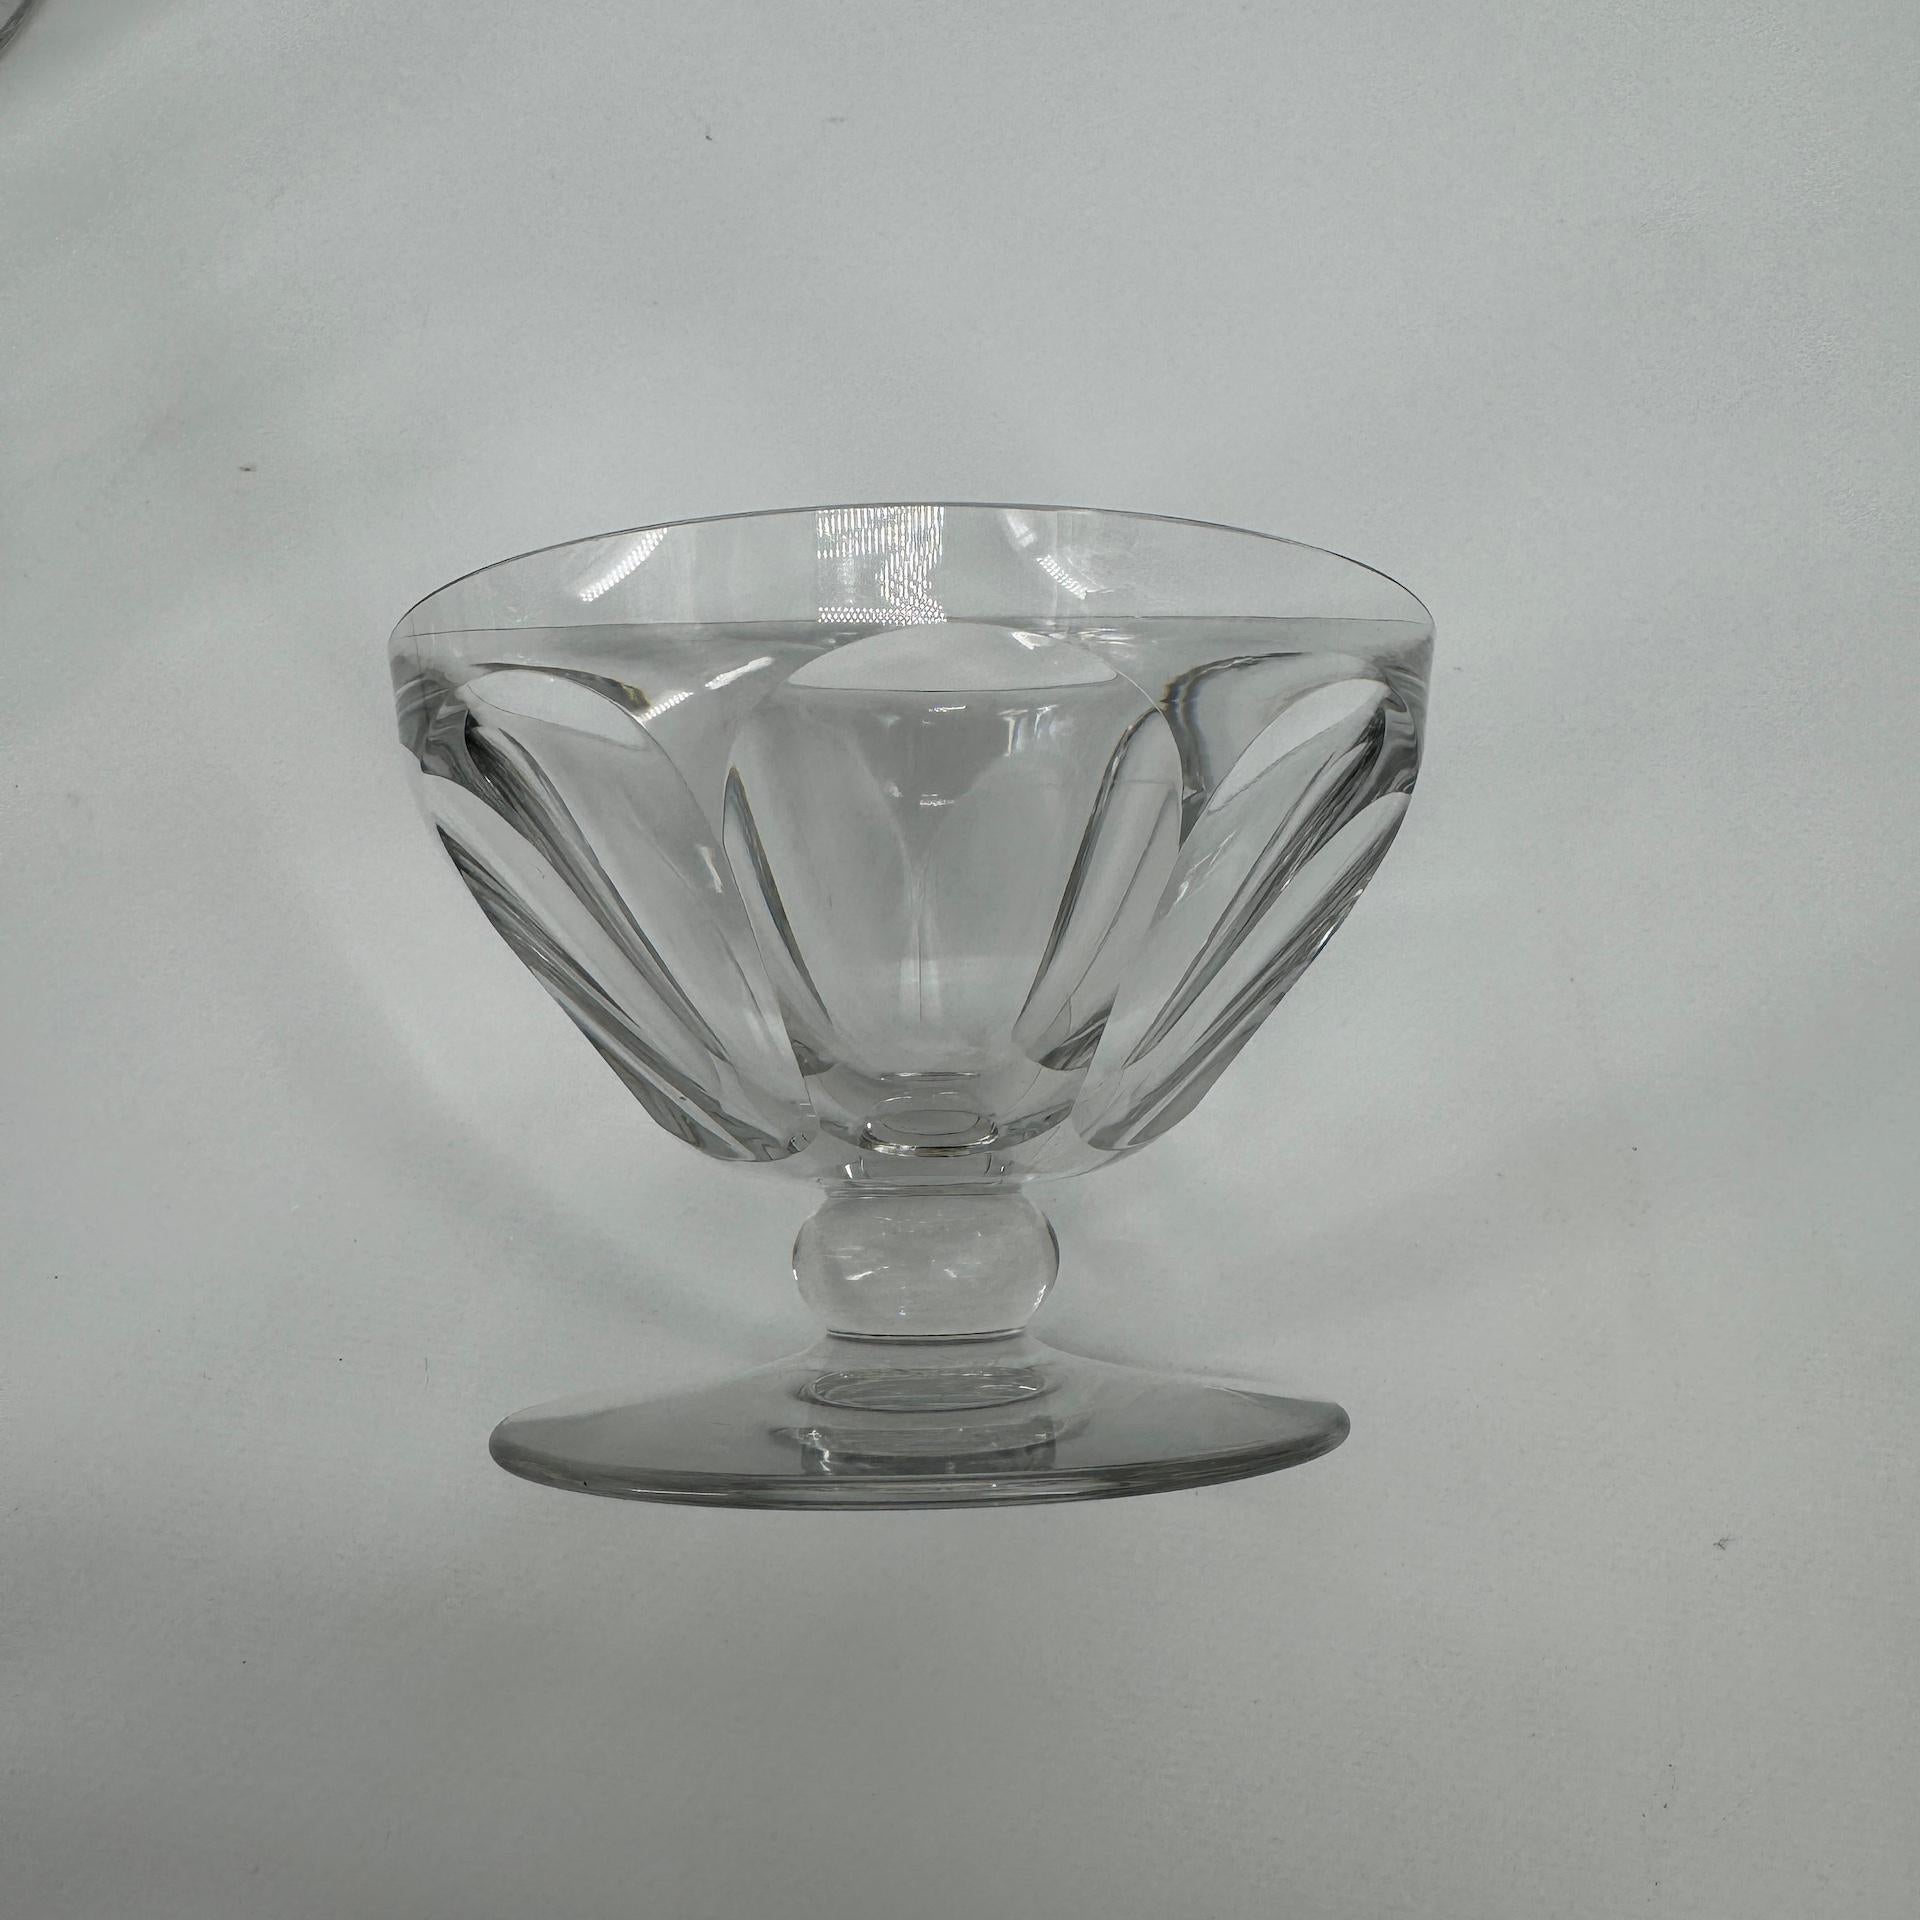 8 Baccarat Crystal Champagne or Cocktail Glasses, Talleyrand Model, Art Deco Era For Sale 4